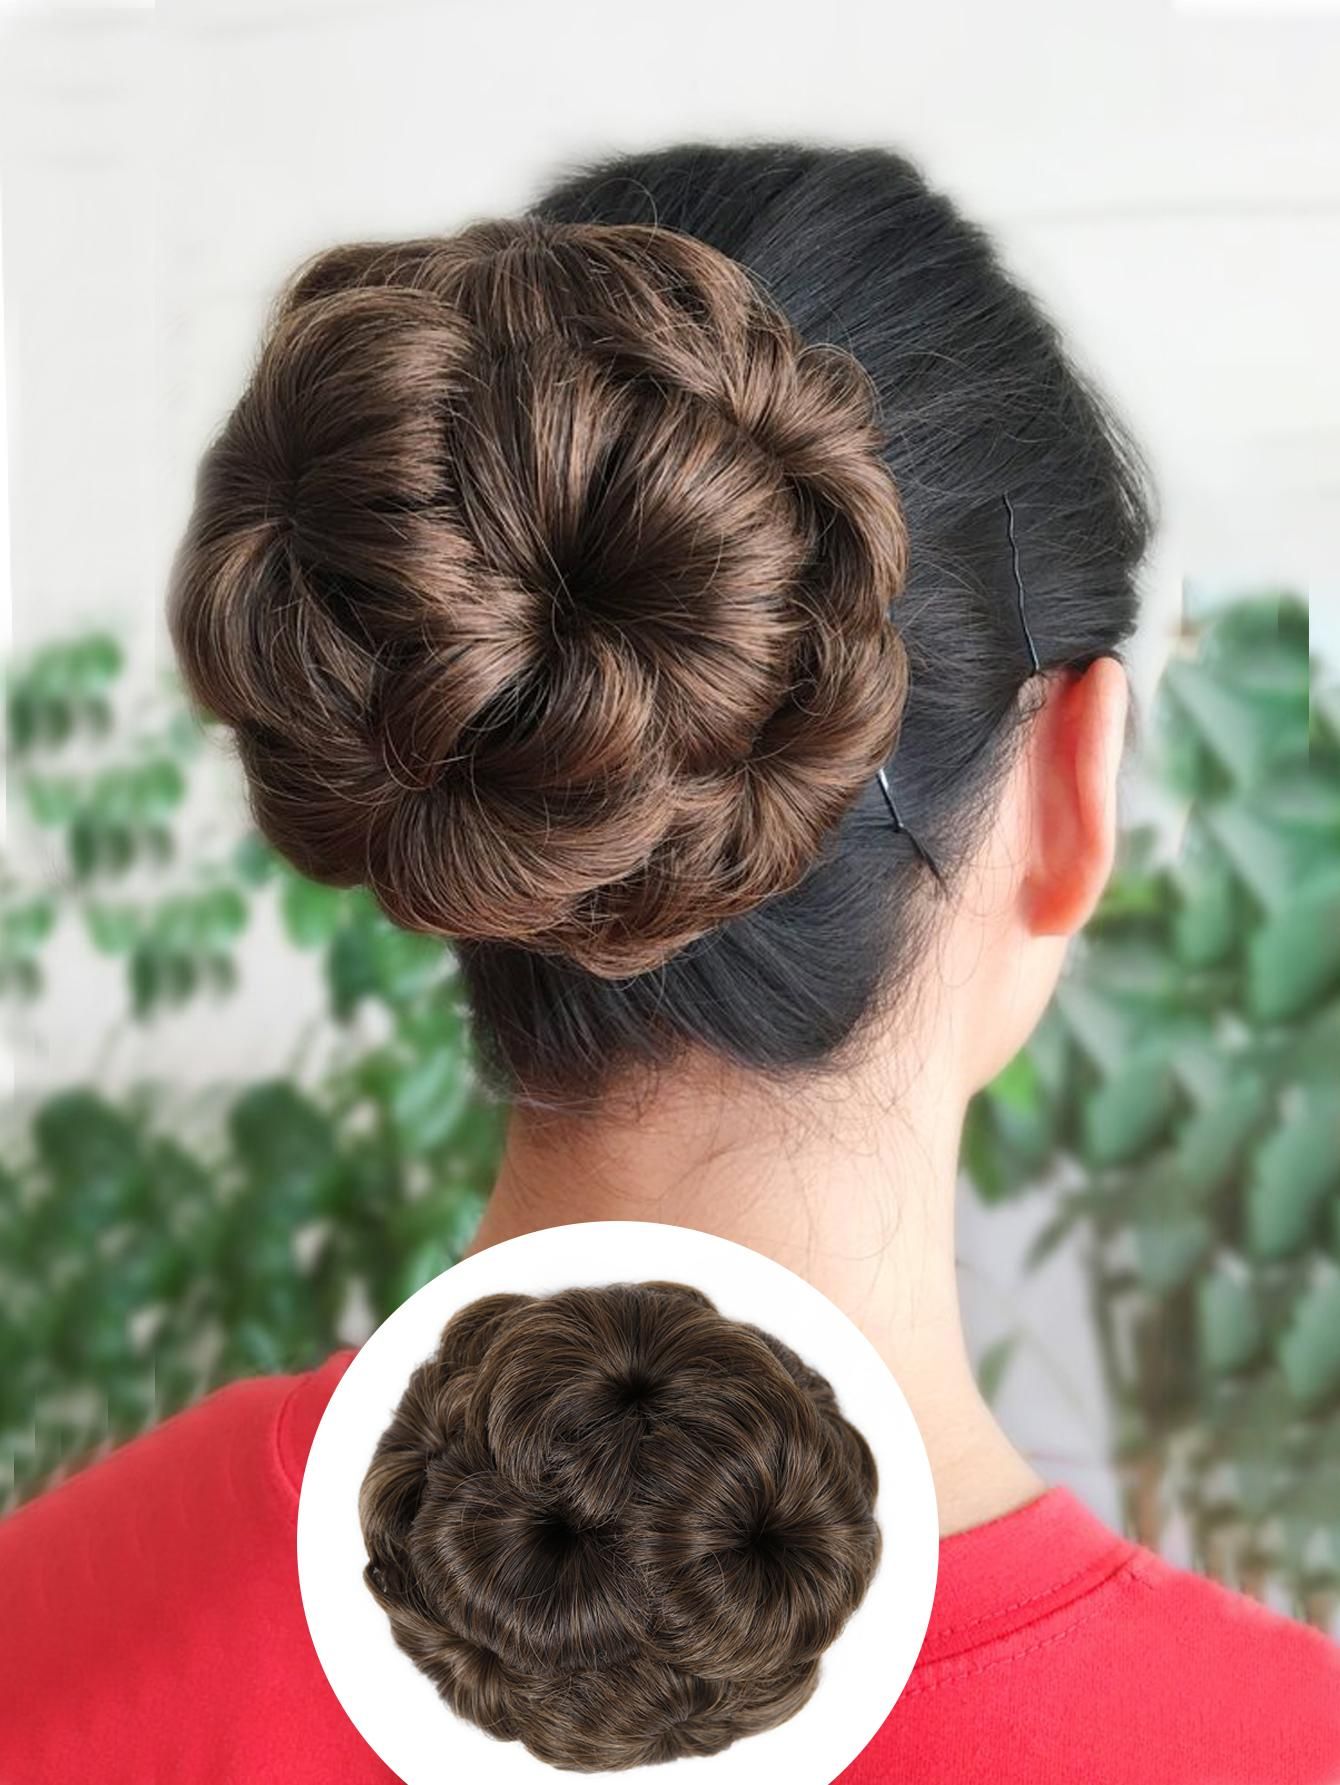 Stunning Braid Embellished Updo: A Sophisticated Hairstyle for Any Occasion